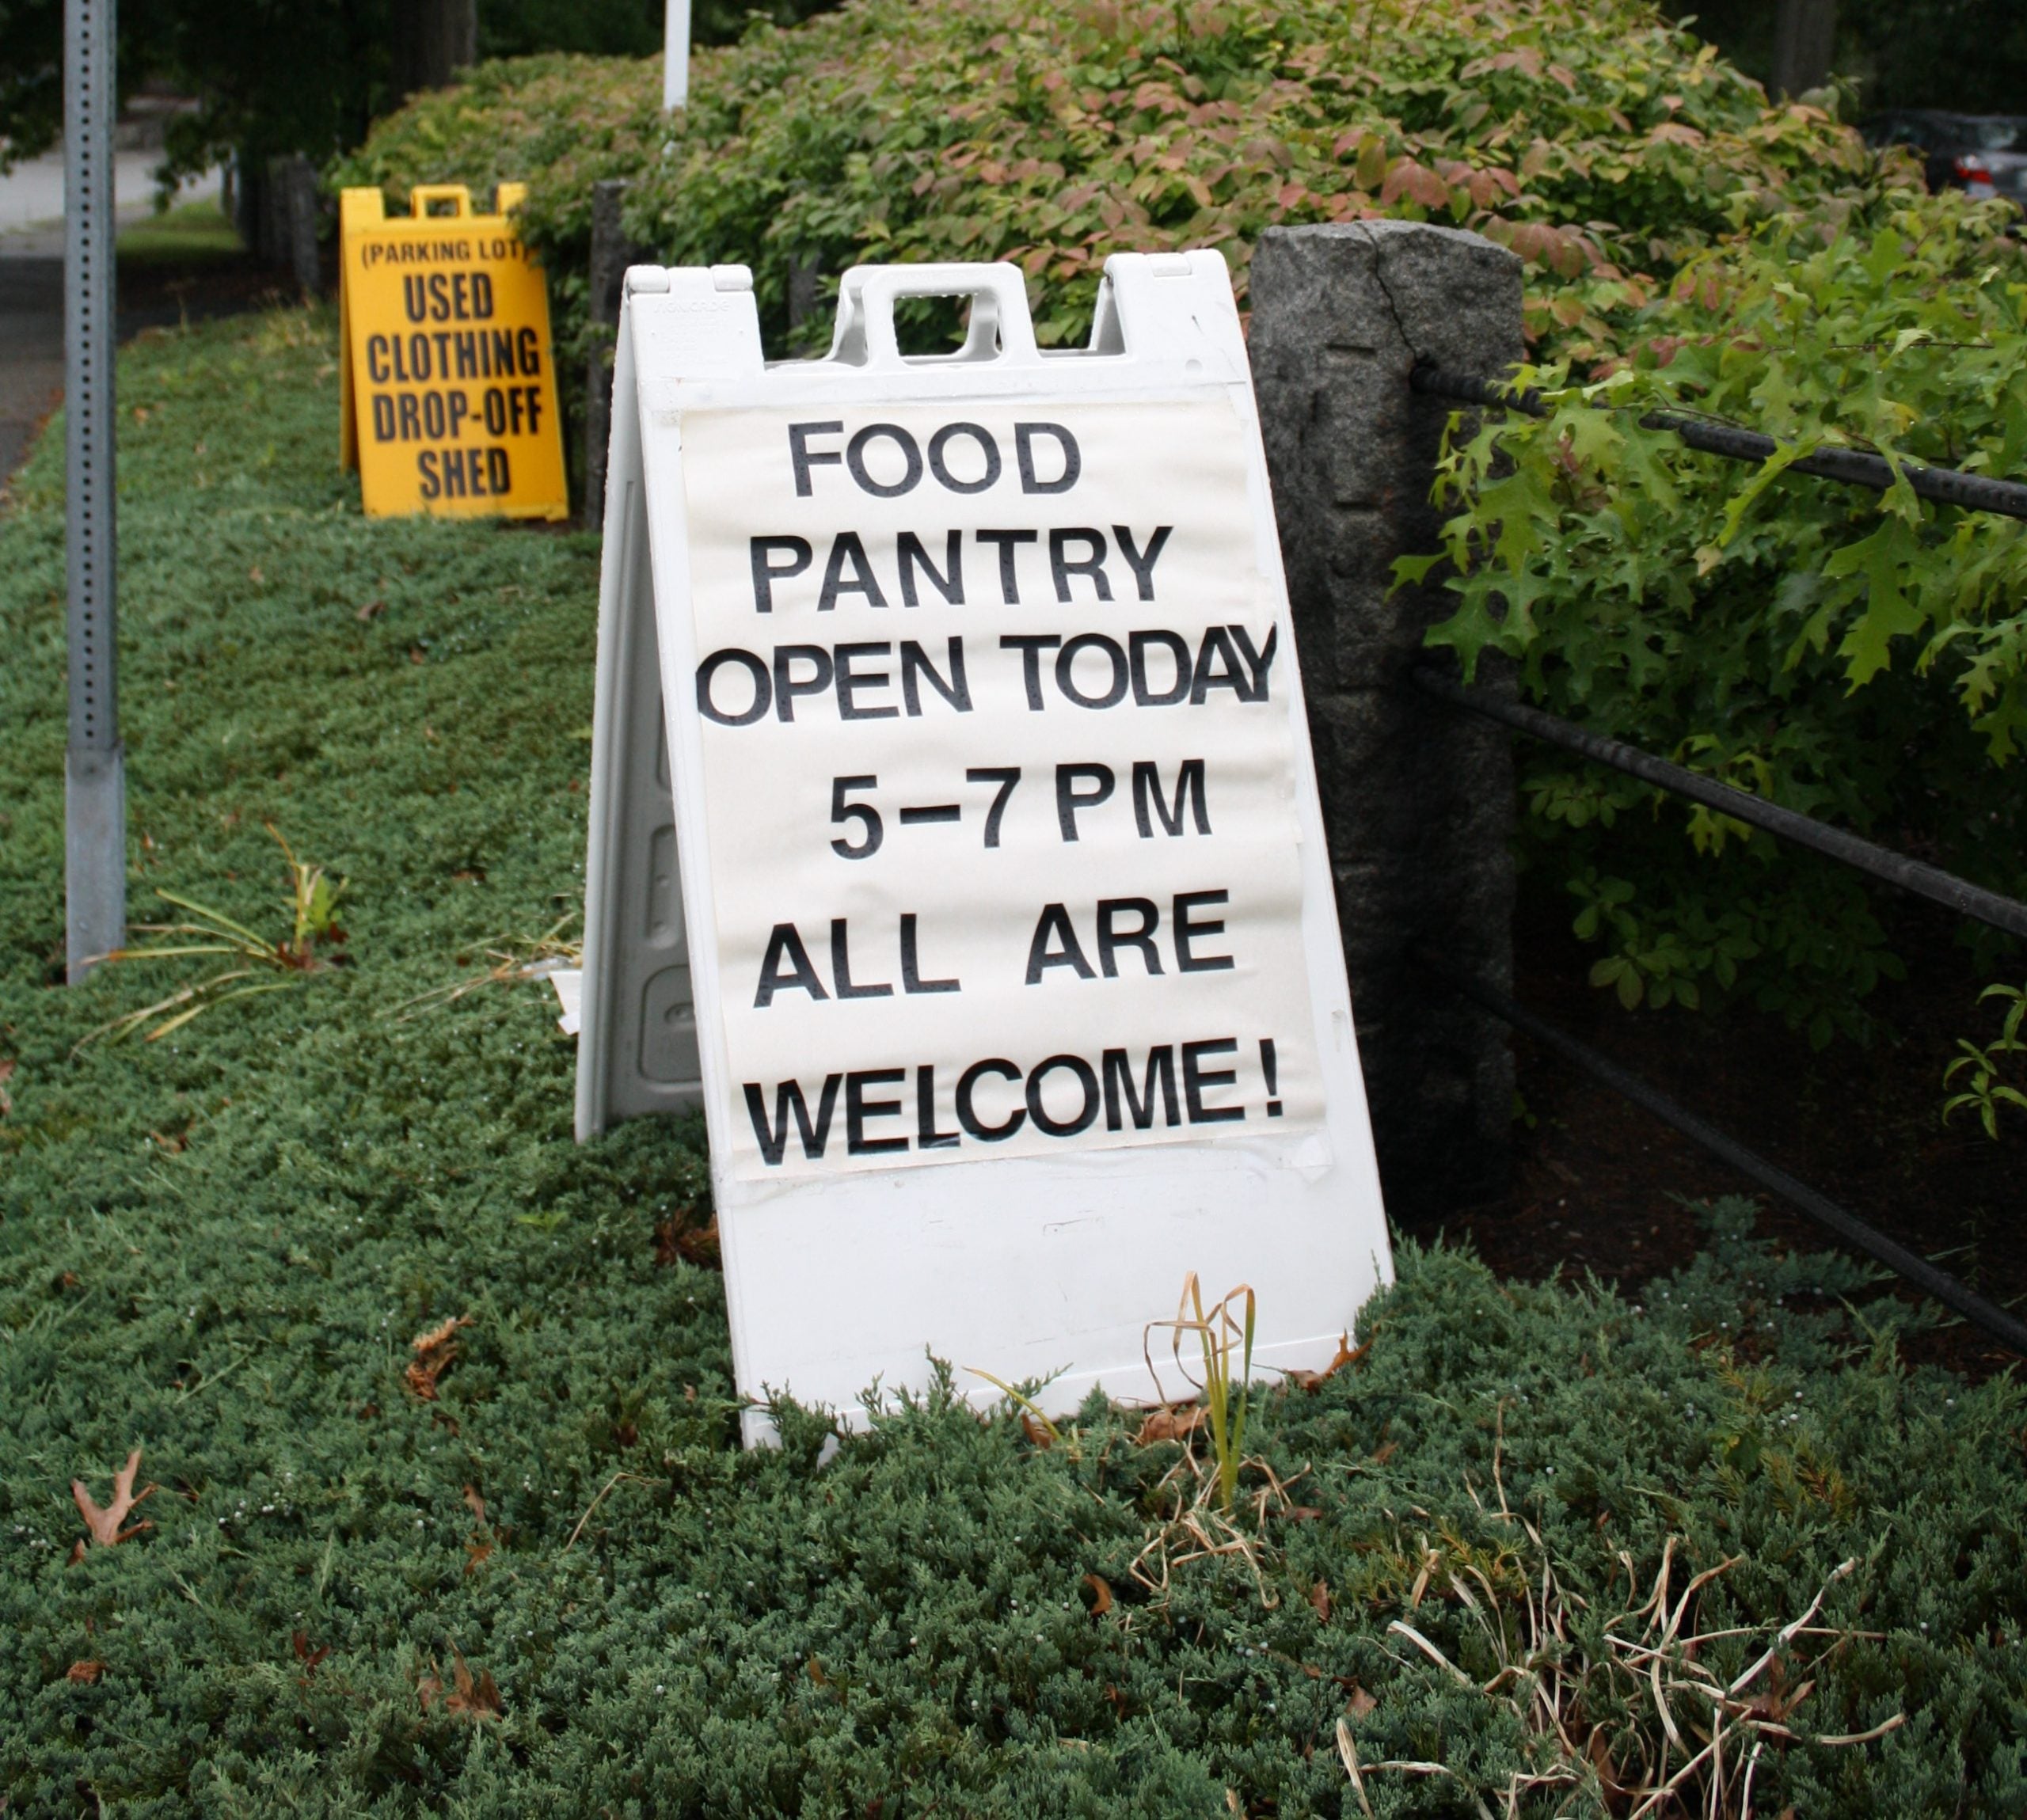 Many food pantries in Rhode Island have best practices in place to ensure food safe fruits and vegetables for our communities. Check with your local food pantry before dropping off produce to see if they require anything in addition to this document.